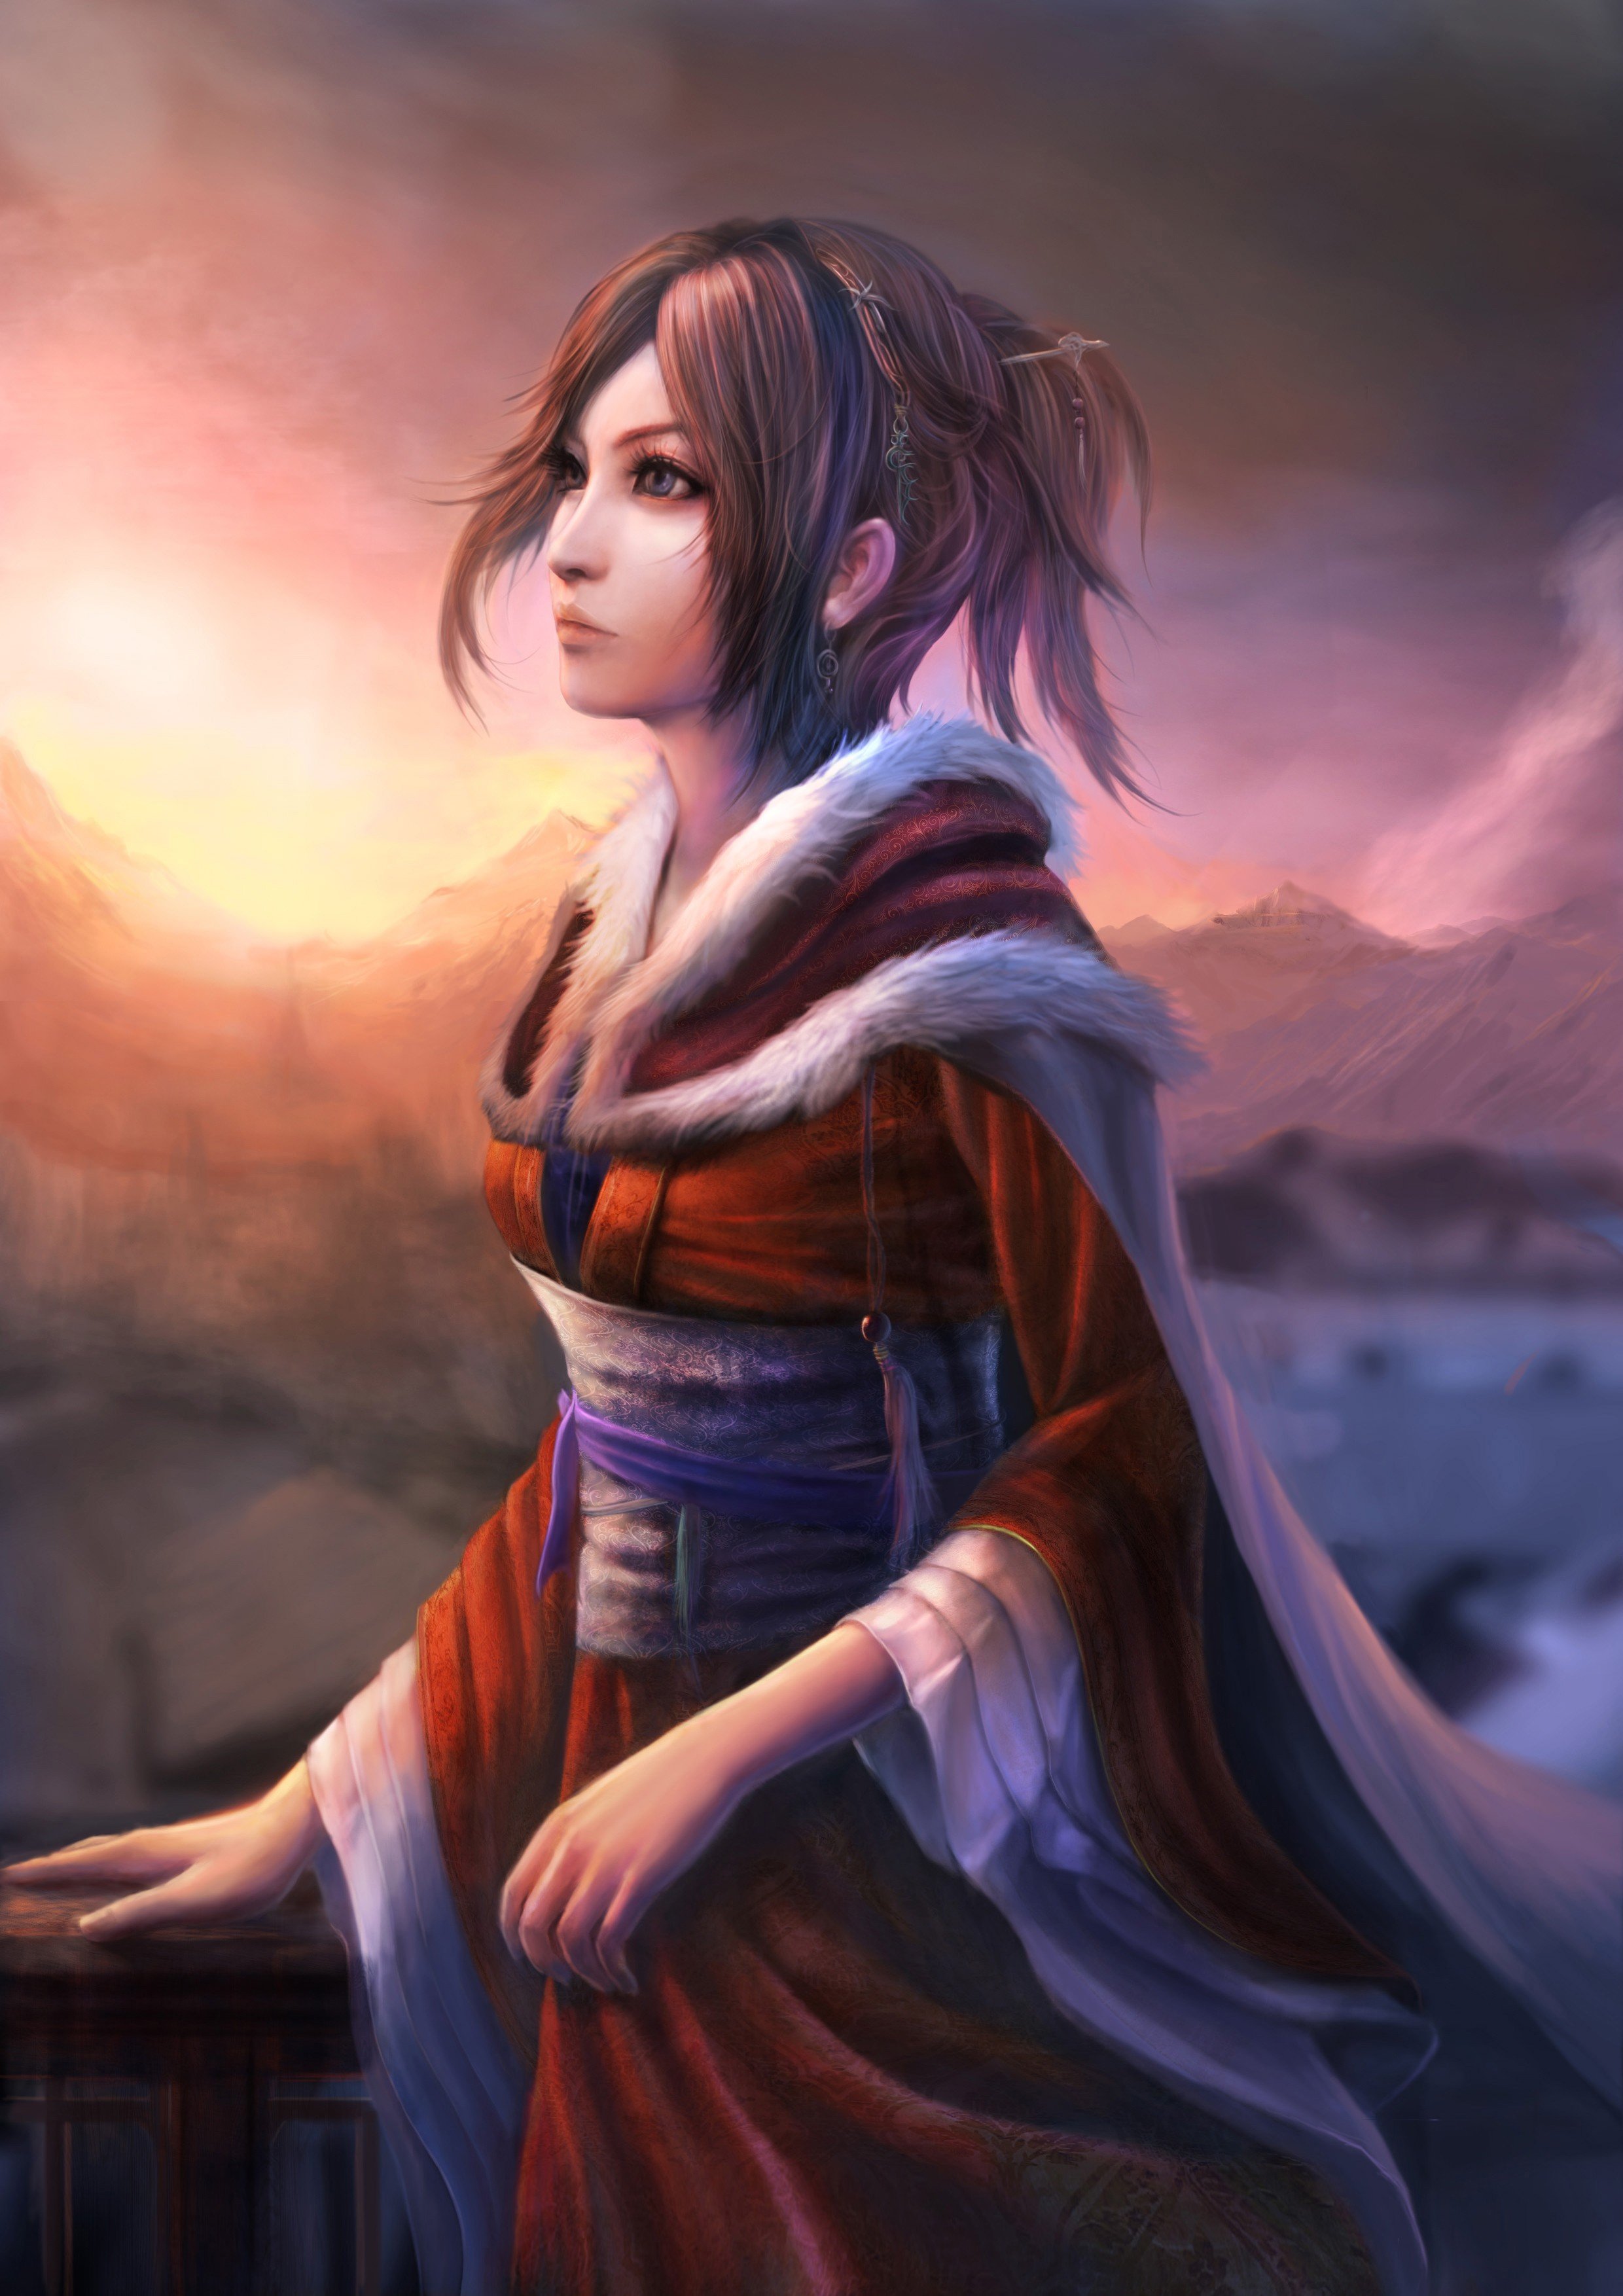 brunettes, Sunset, Mountains, Clouds, Nature, Trees, Forests, Blue, Eyes, Belts, Outdoors, Short, Hair, Cloaks, Earrings, Artwork, Japanese, Clothes, Anime, Girls, Hair, Band, Railing, Hair, Ornaments, Skies, Or Wallpaper